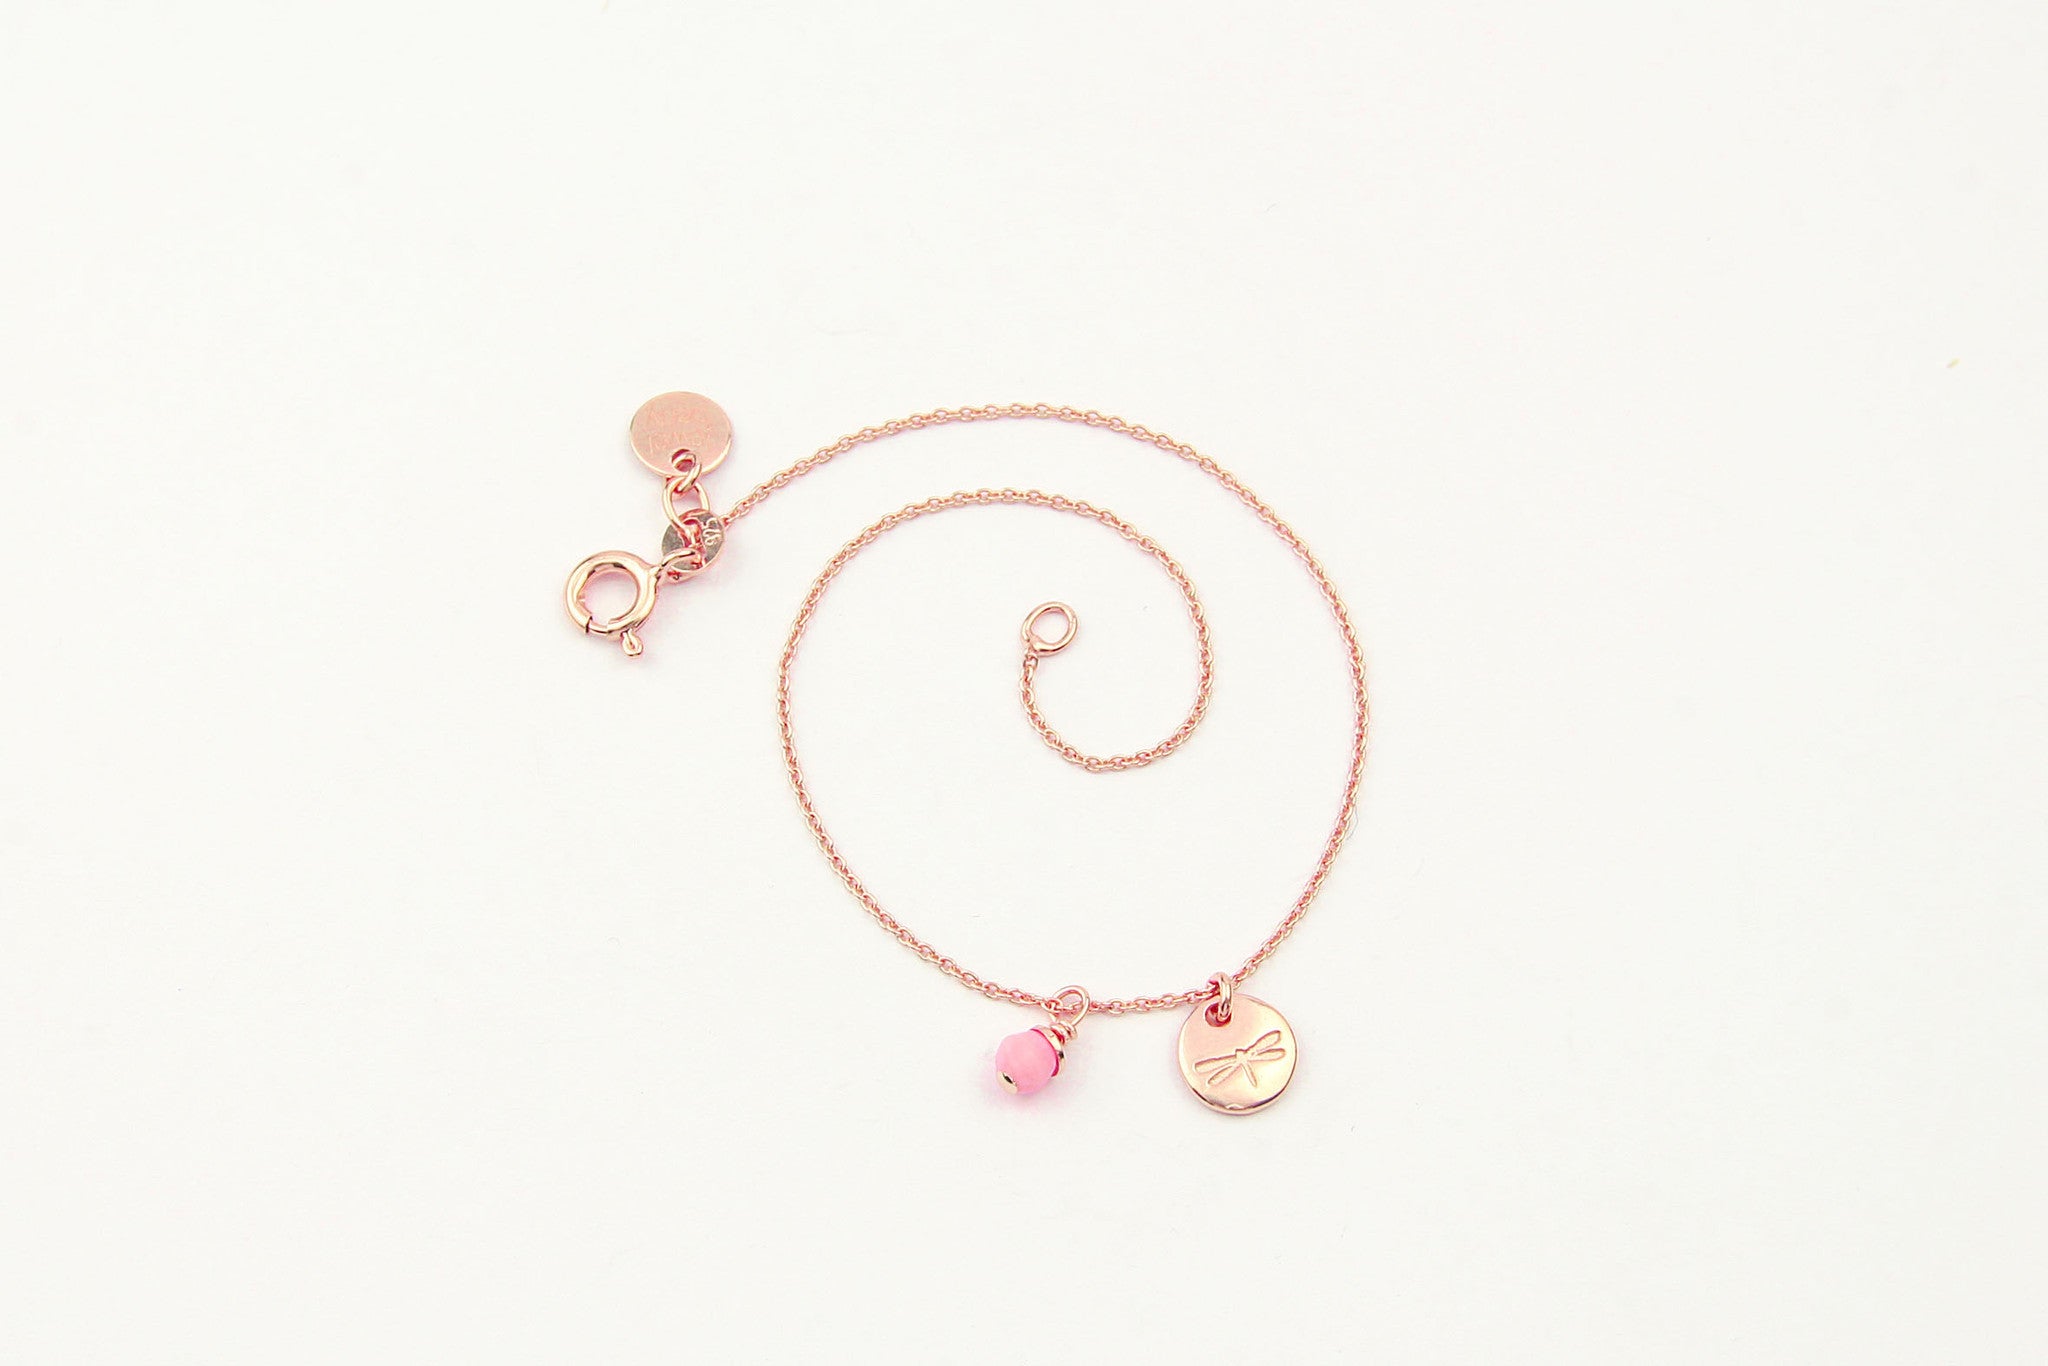 jewelberry armband bracelet dragonfly token rose gold plated sterling silver fine jewelry handmade with love fairtrade anchor chain